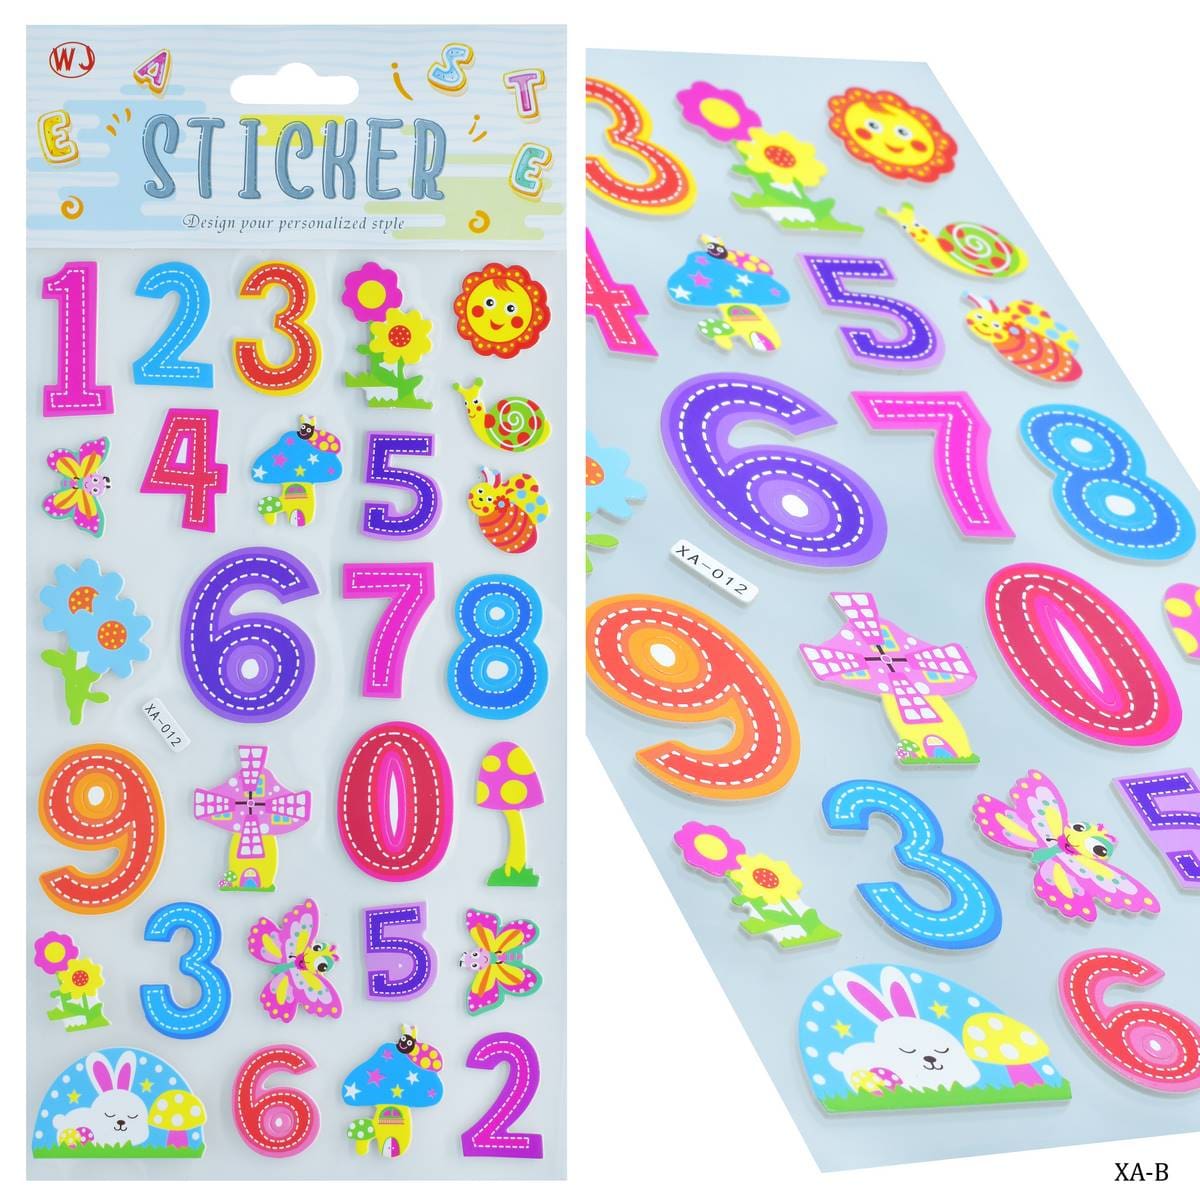 jags-mumbai scrapbook Stickers Sticker Design Your Personalized Style 123